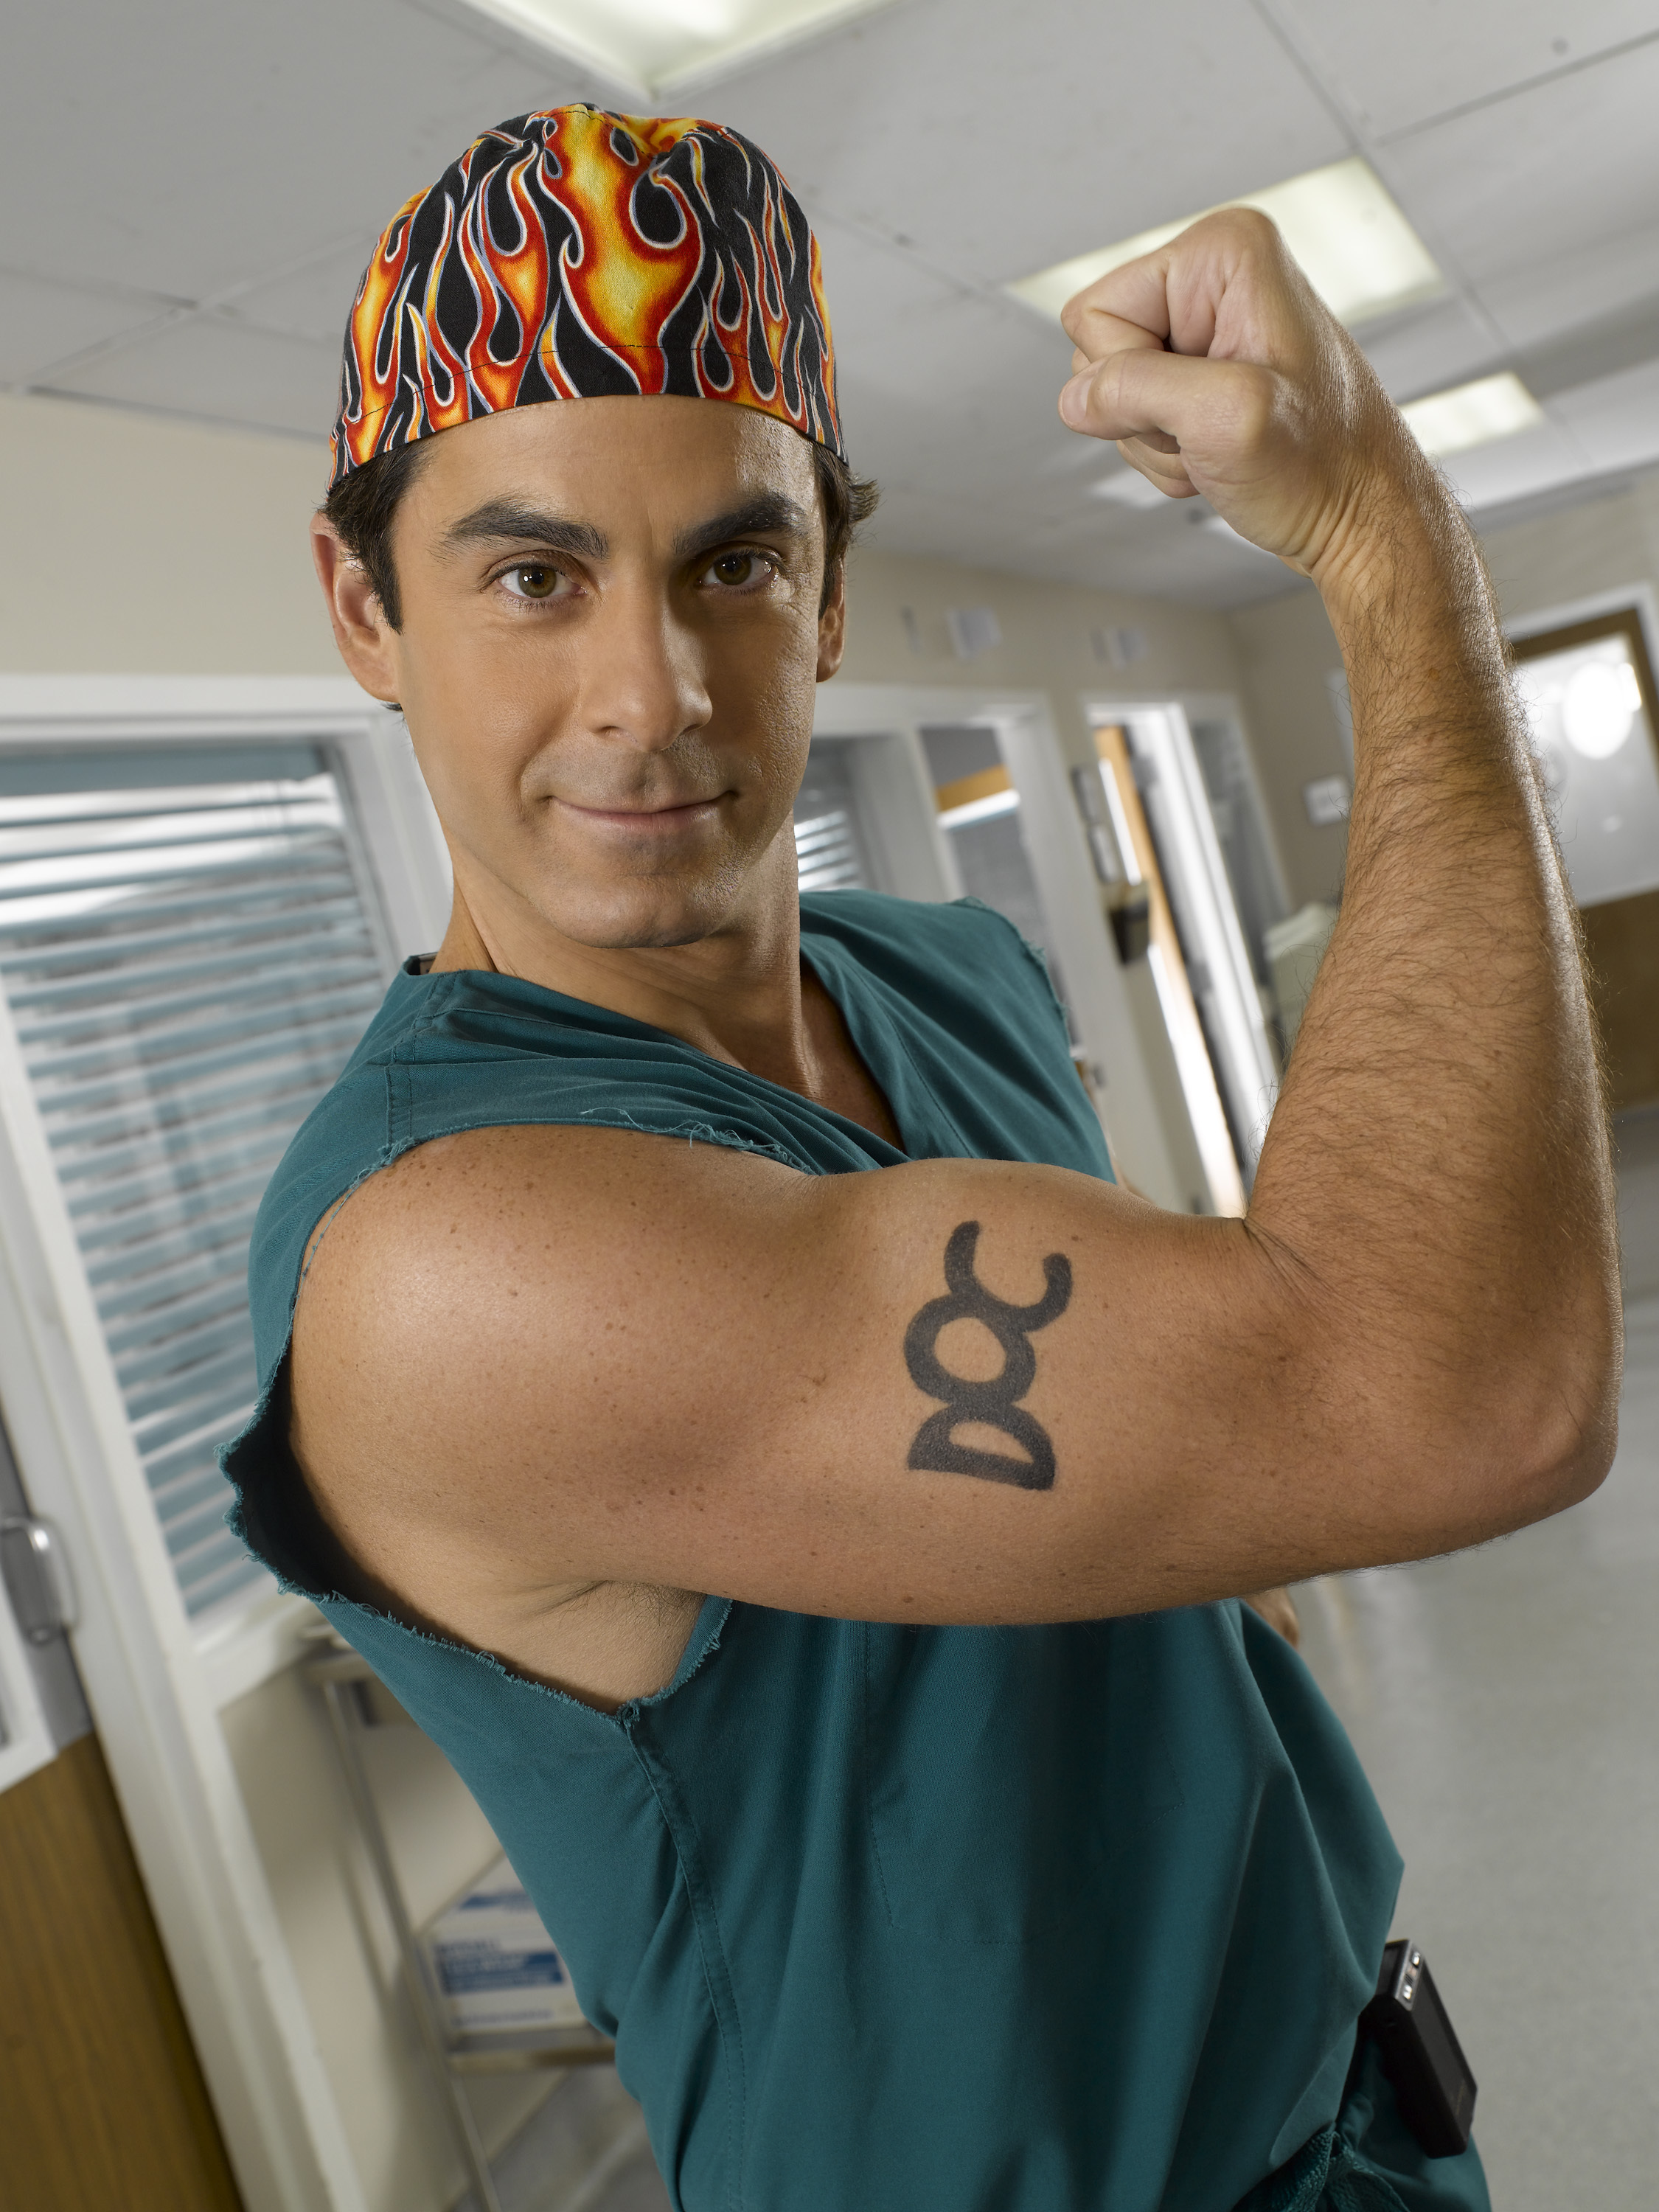 Pin by Renee Piermattei on NOT appropriate spa outfits | The todd, Scrubs,  Tattoo tv shows